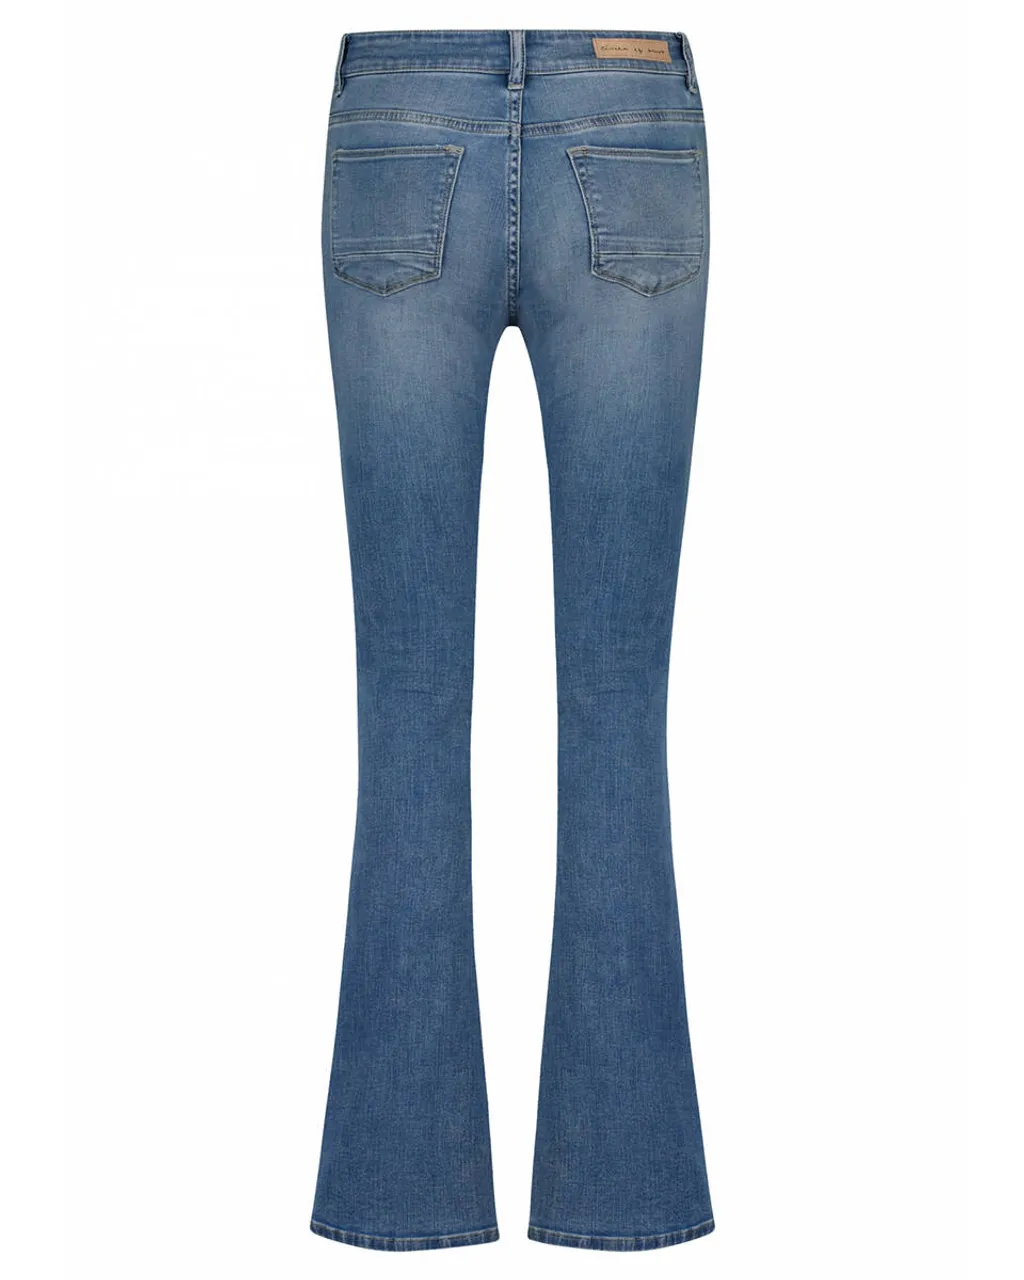 Circle of Trust Jeans s24 141 lizzy fla